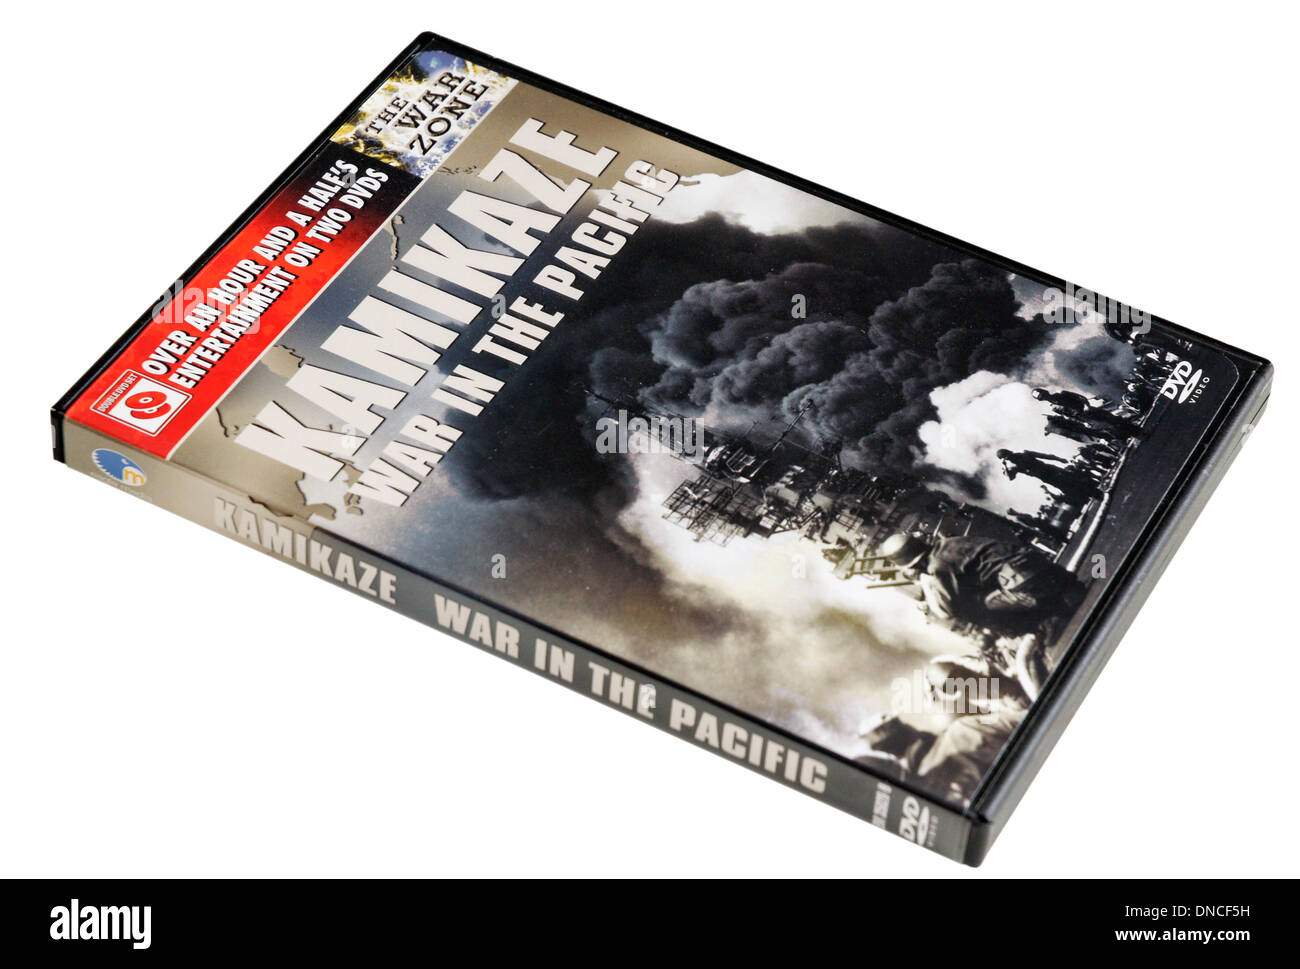 Kamikaze War in the Pacific DVD Stock Photo